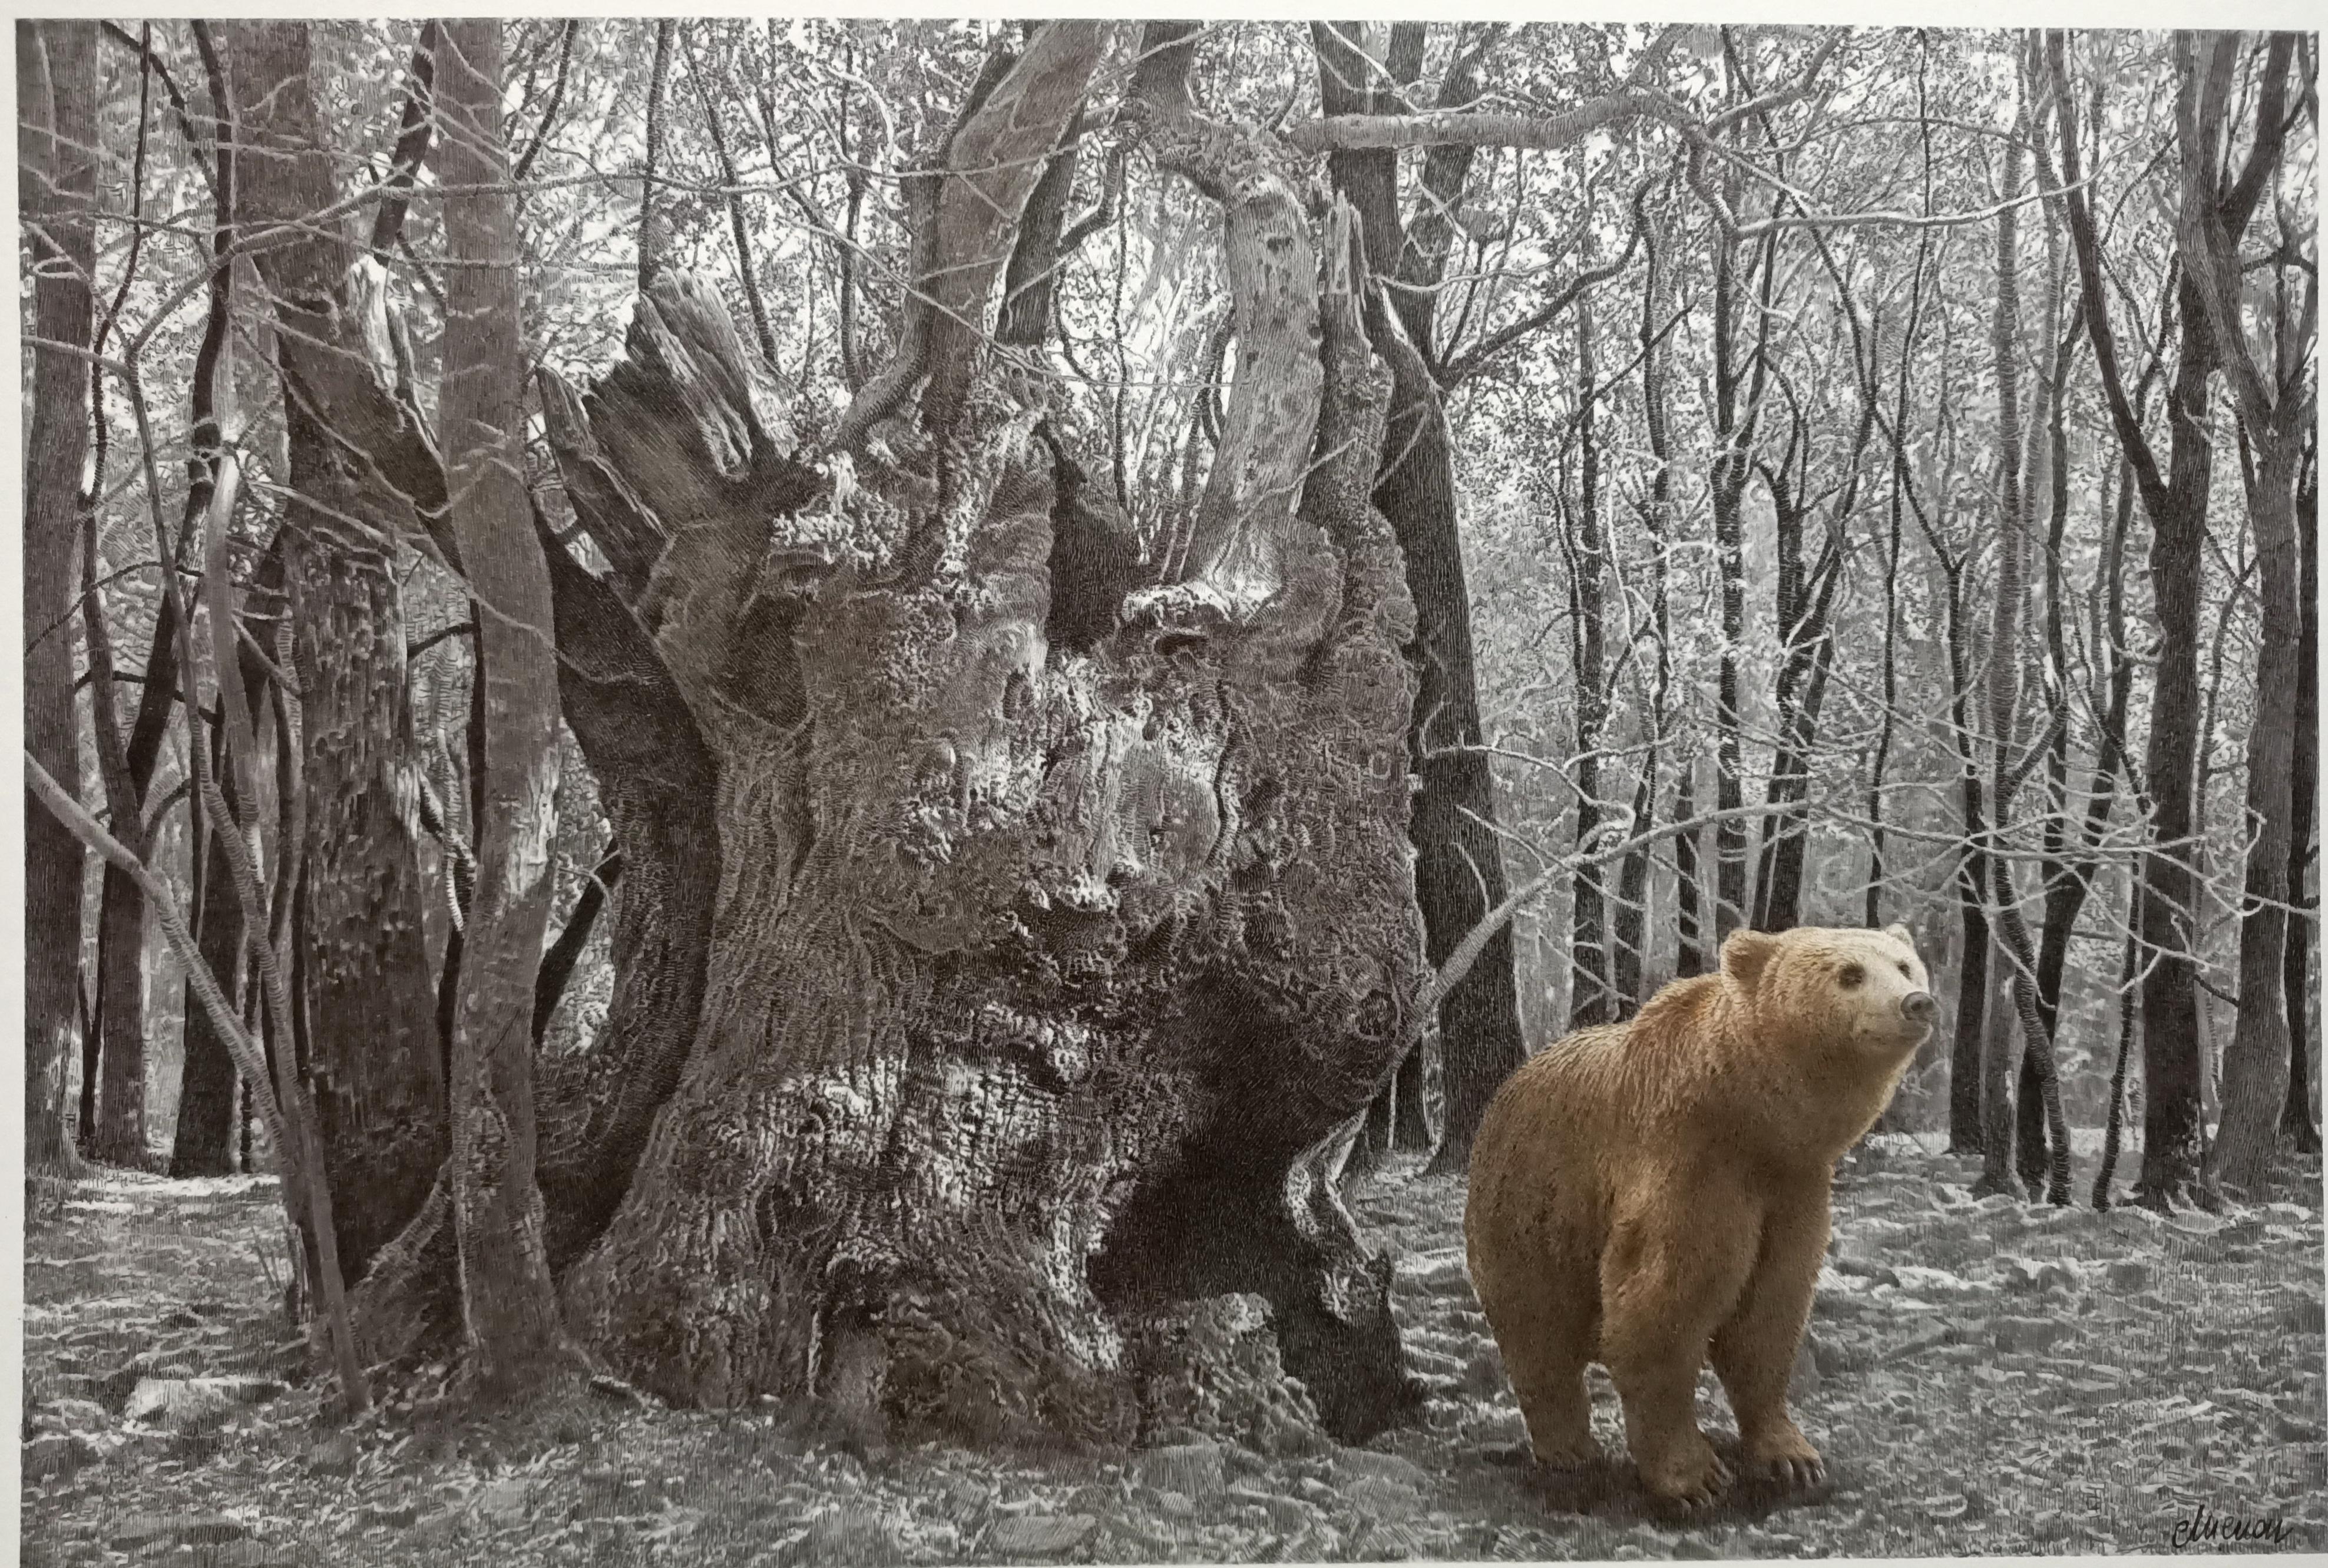 Sara Menon Figurative Art - Black and white pencil drawing and watercolour of a brown bear in the woods